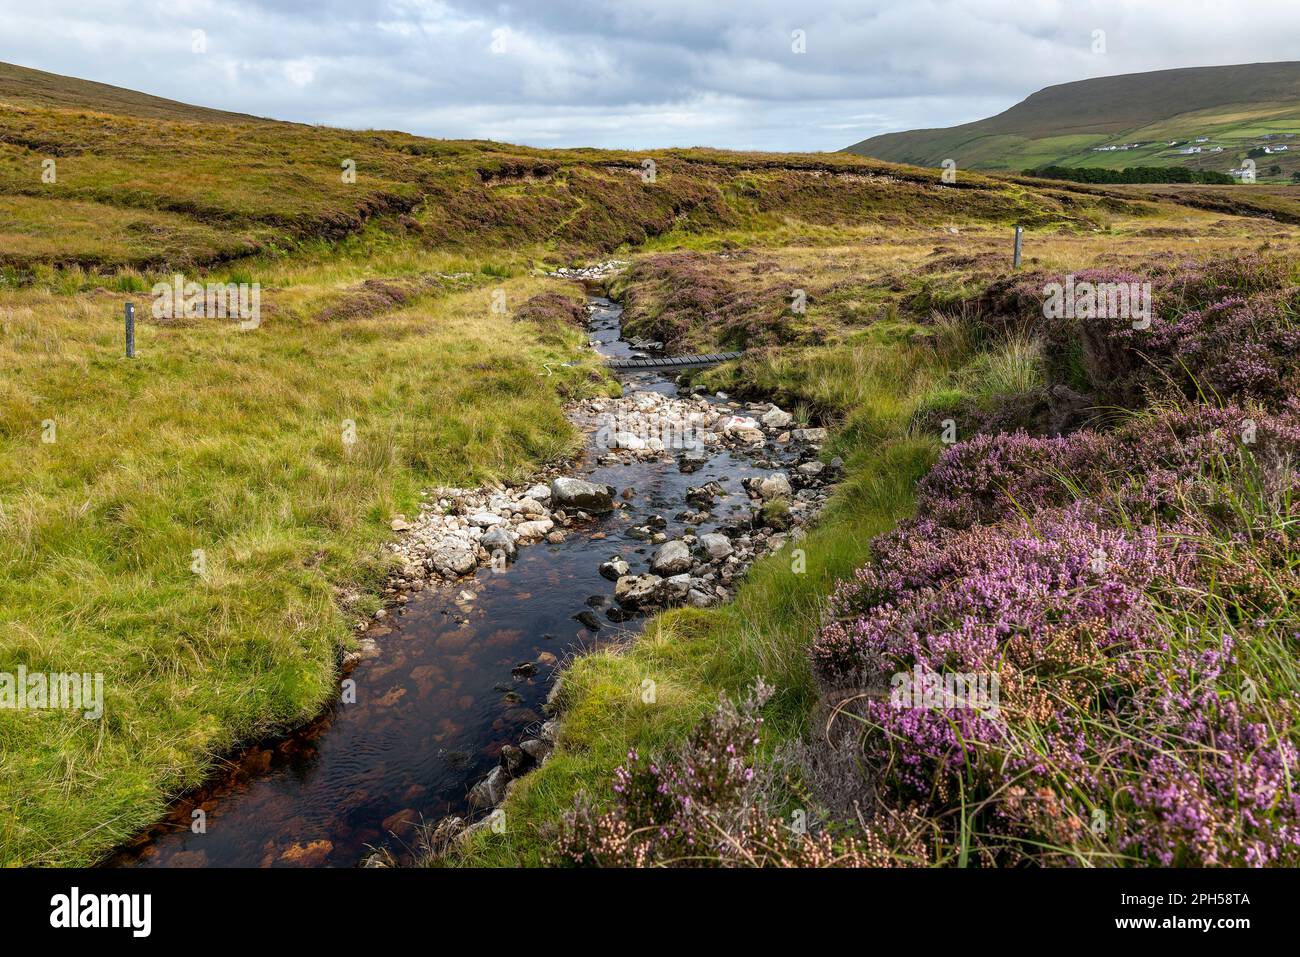 Hiking trail crossing a picturesque brook on the Benwee loop walk, neat Portacloy, County Mayo, Ireland Stock Photo